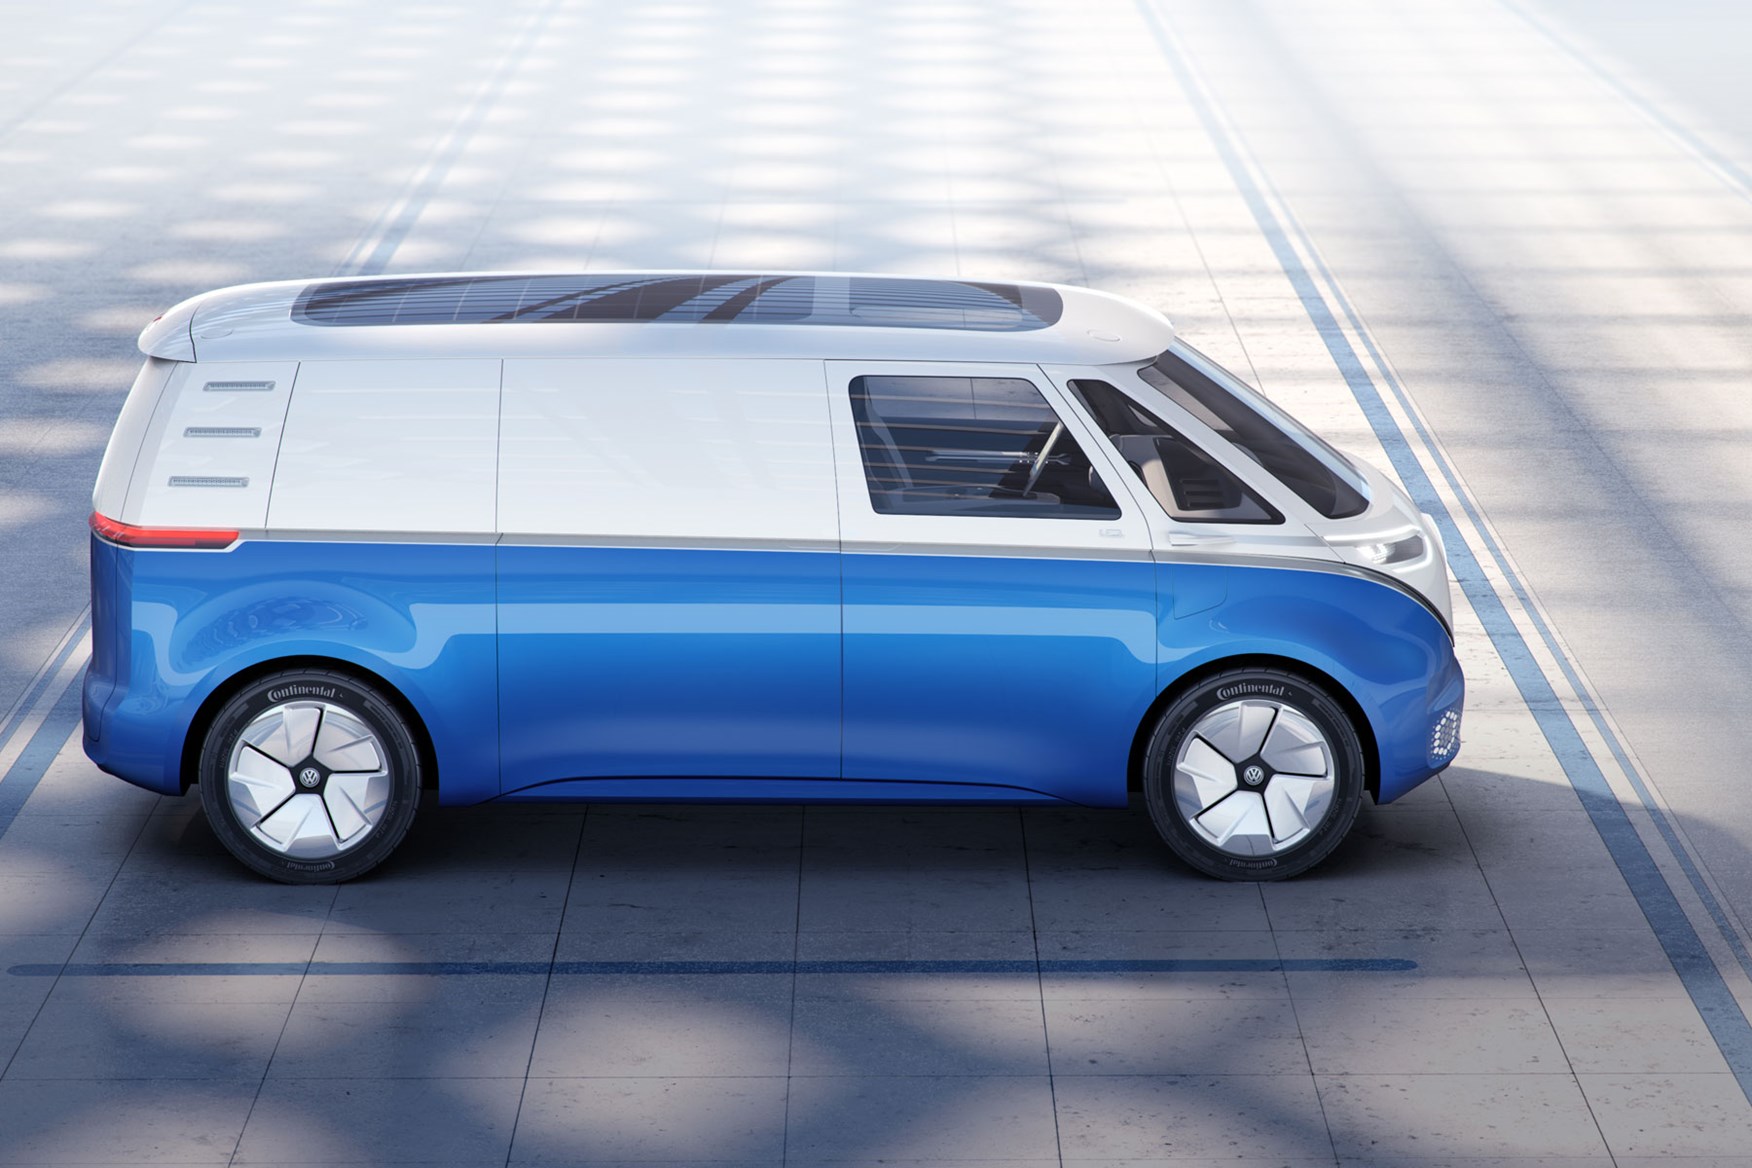 VW ID Buzz Cargo allelectric van concept world debut at the 2018 IAA